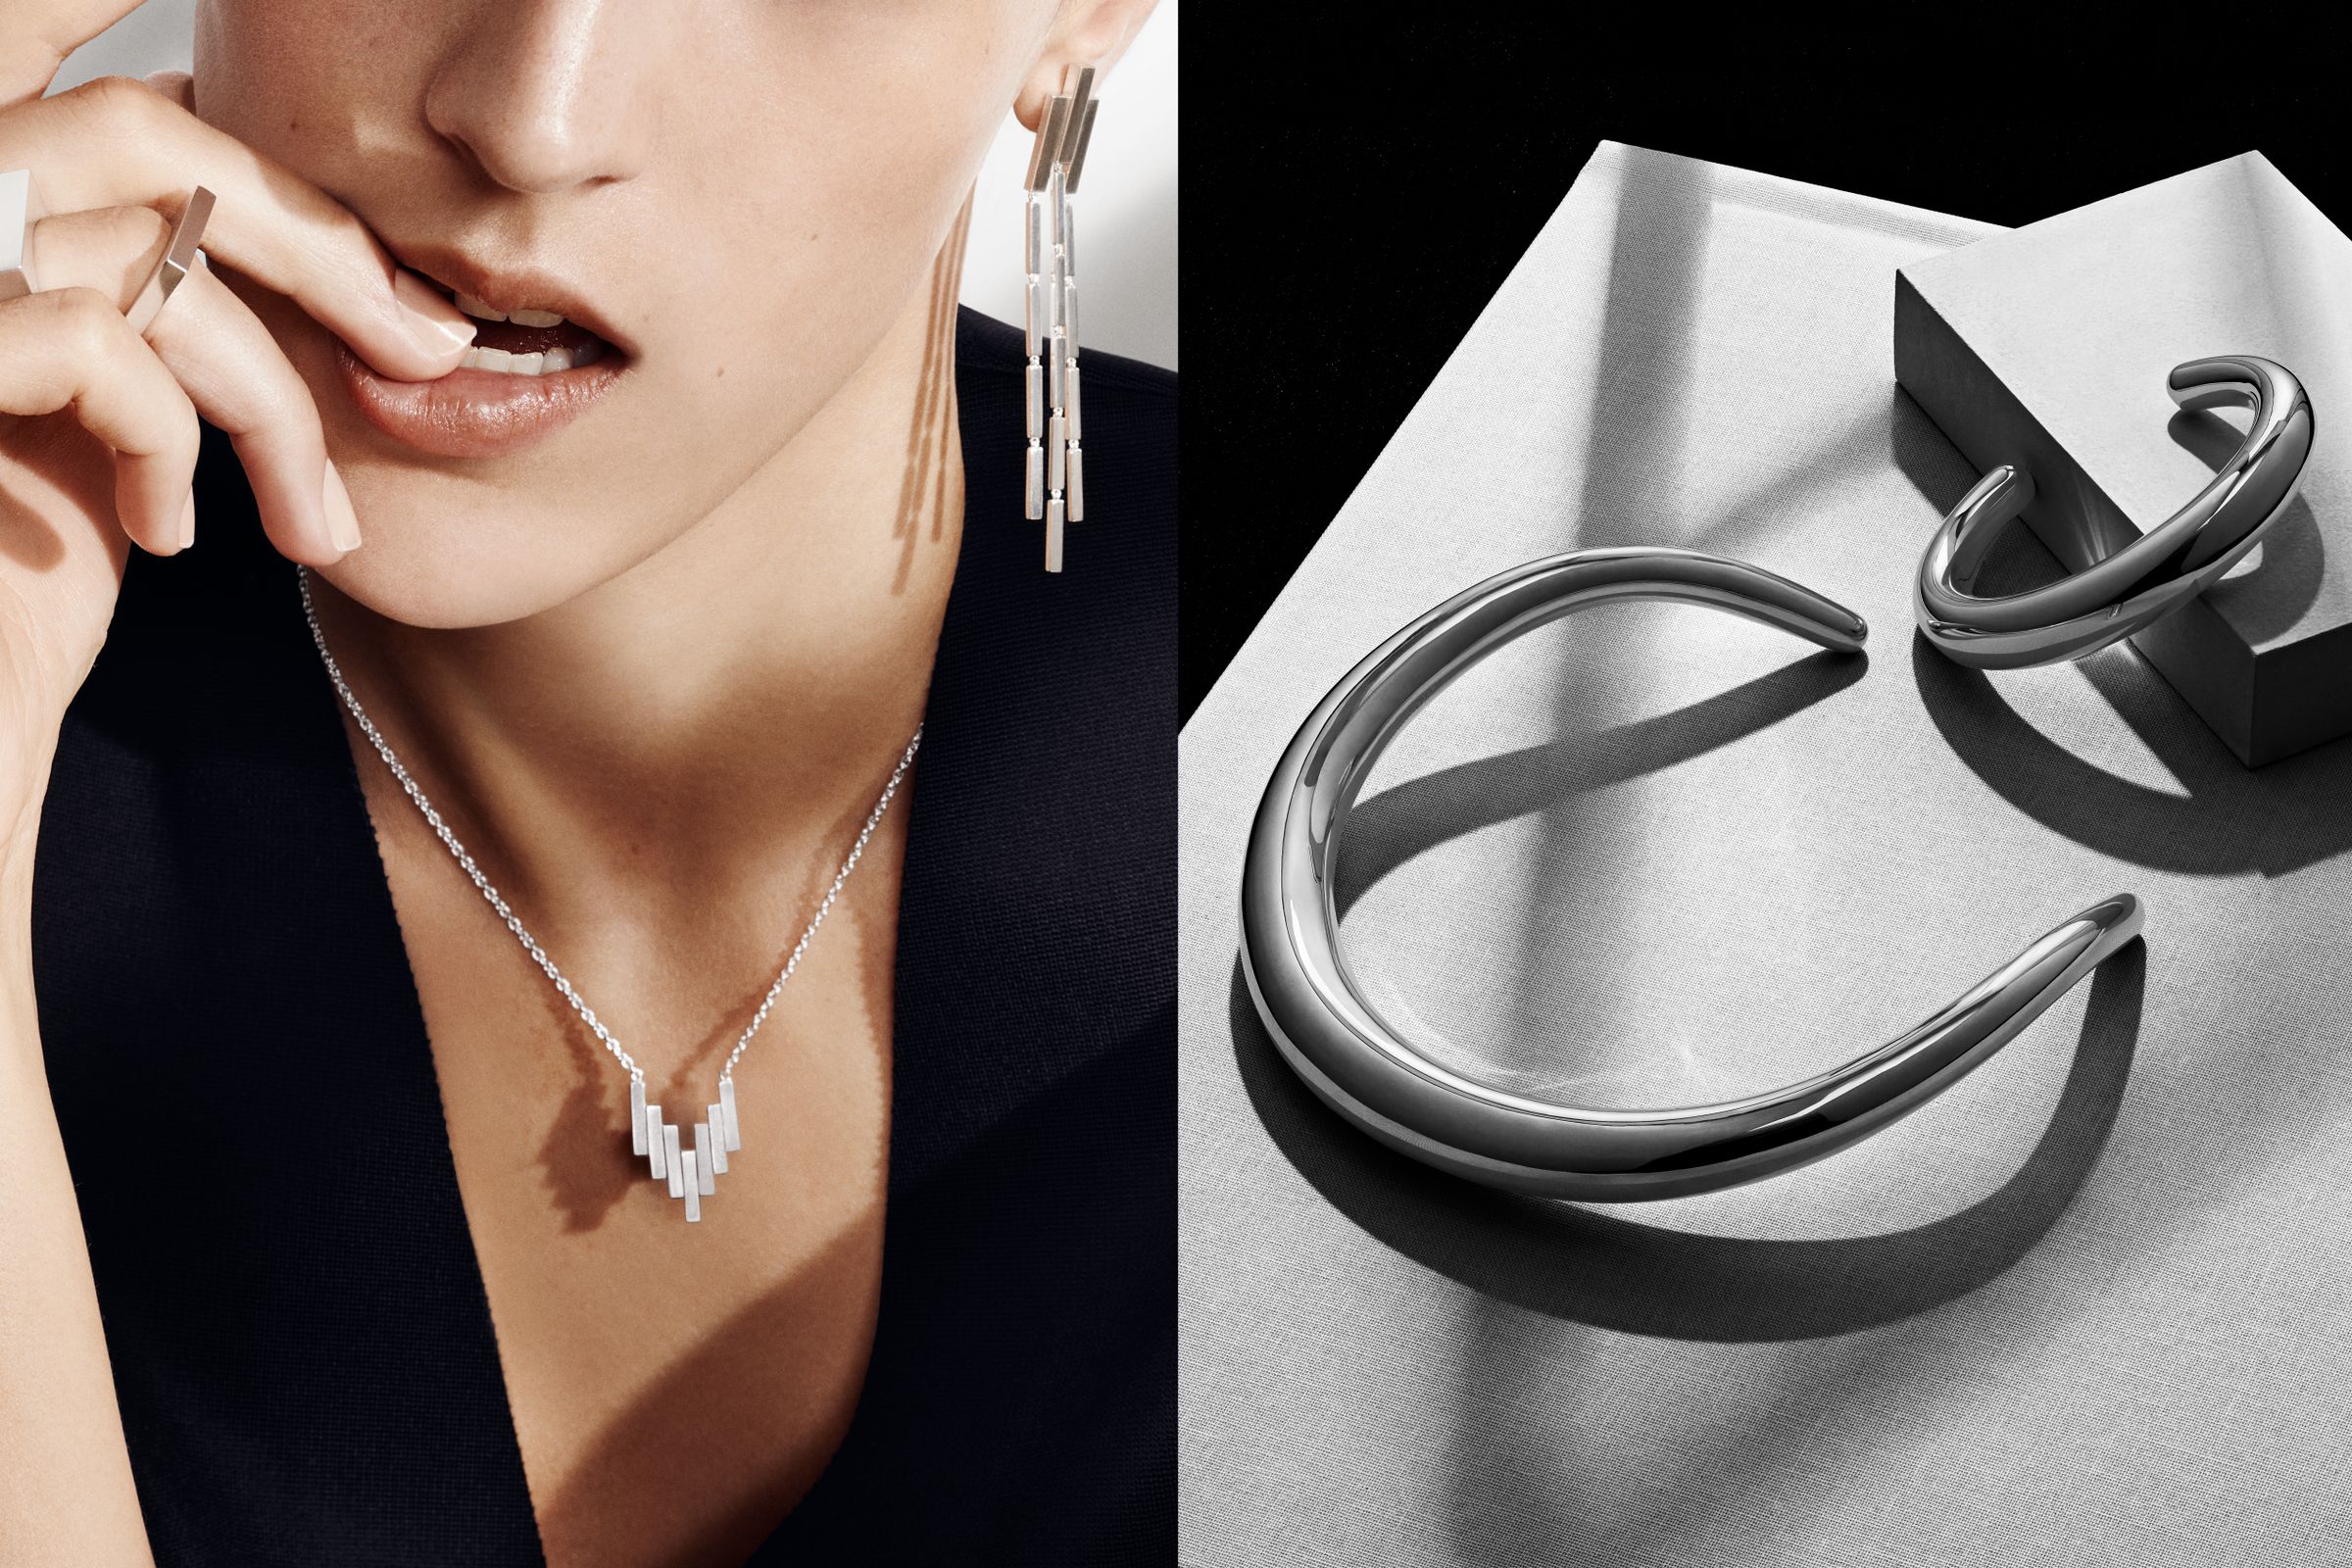 Georg Jensen campaign photographed by Hasse Nielsen and Toby McFarlan Pond